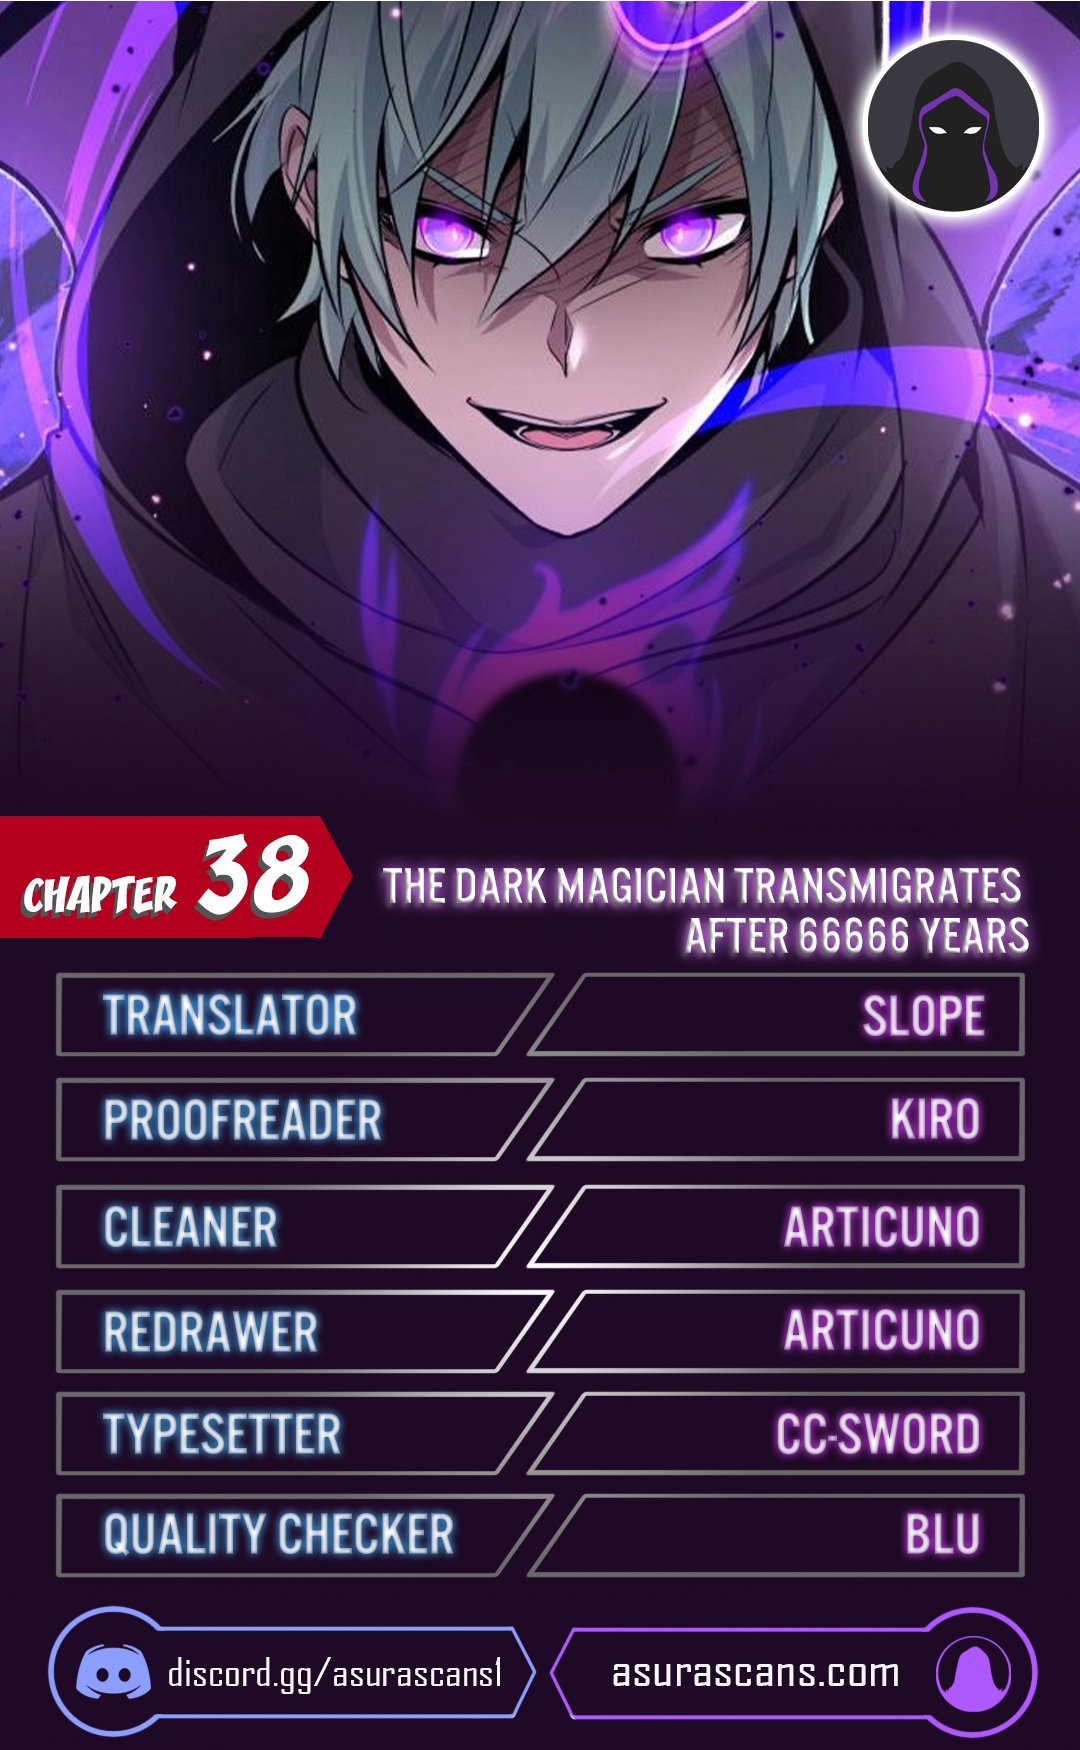 The Dark Magician Transmigrates After 66666 Years - Chapter 20280 - Page 1